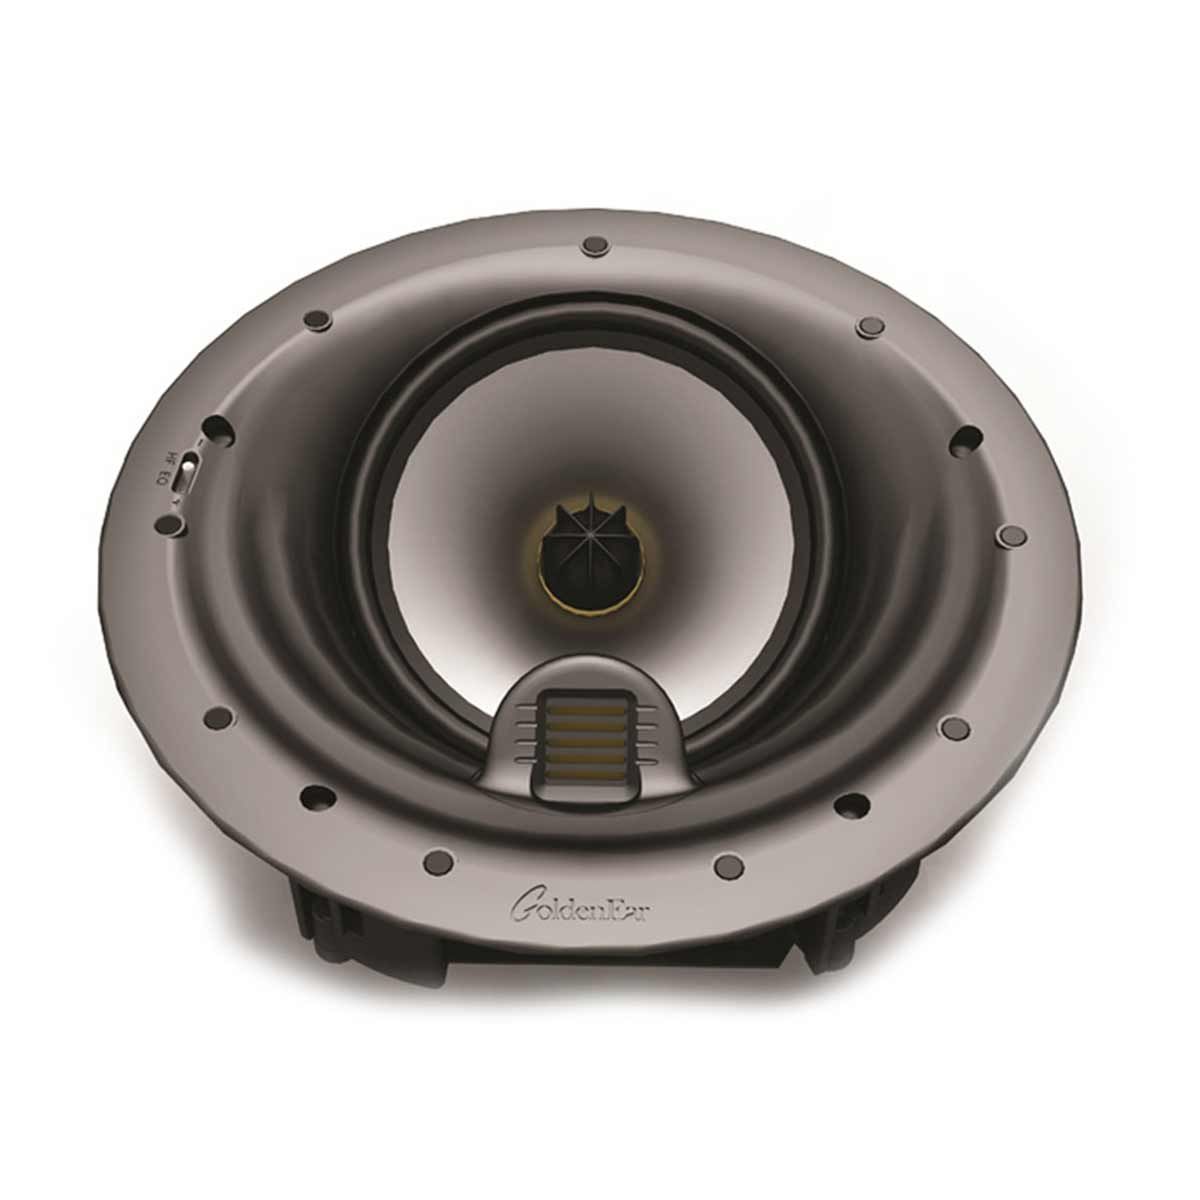 GoldenEar Invisa HTR 7000 In-Wall/In-Ceiling Loudspeaker without grill